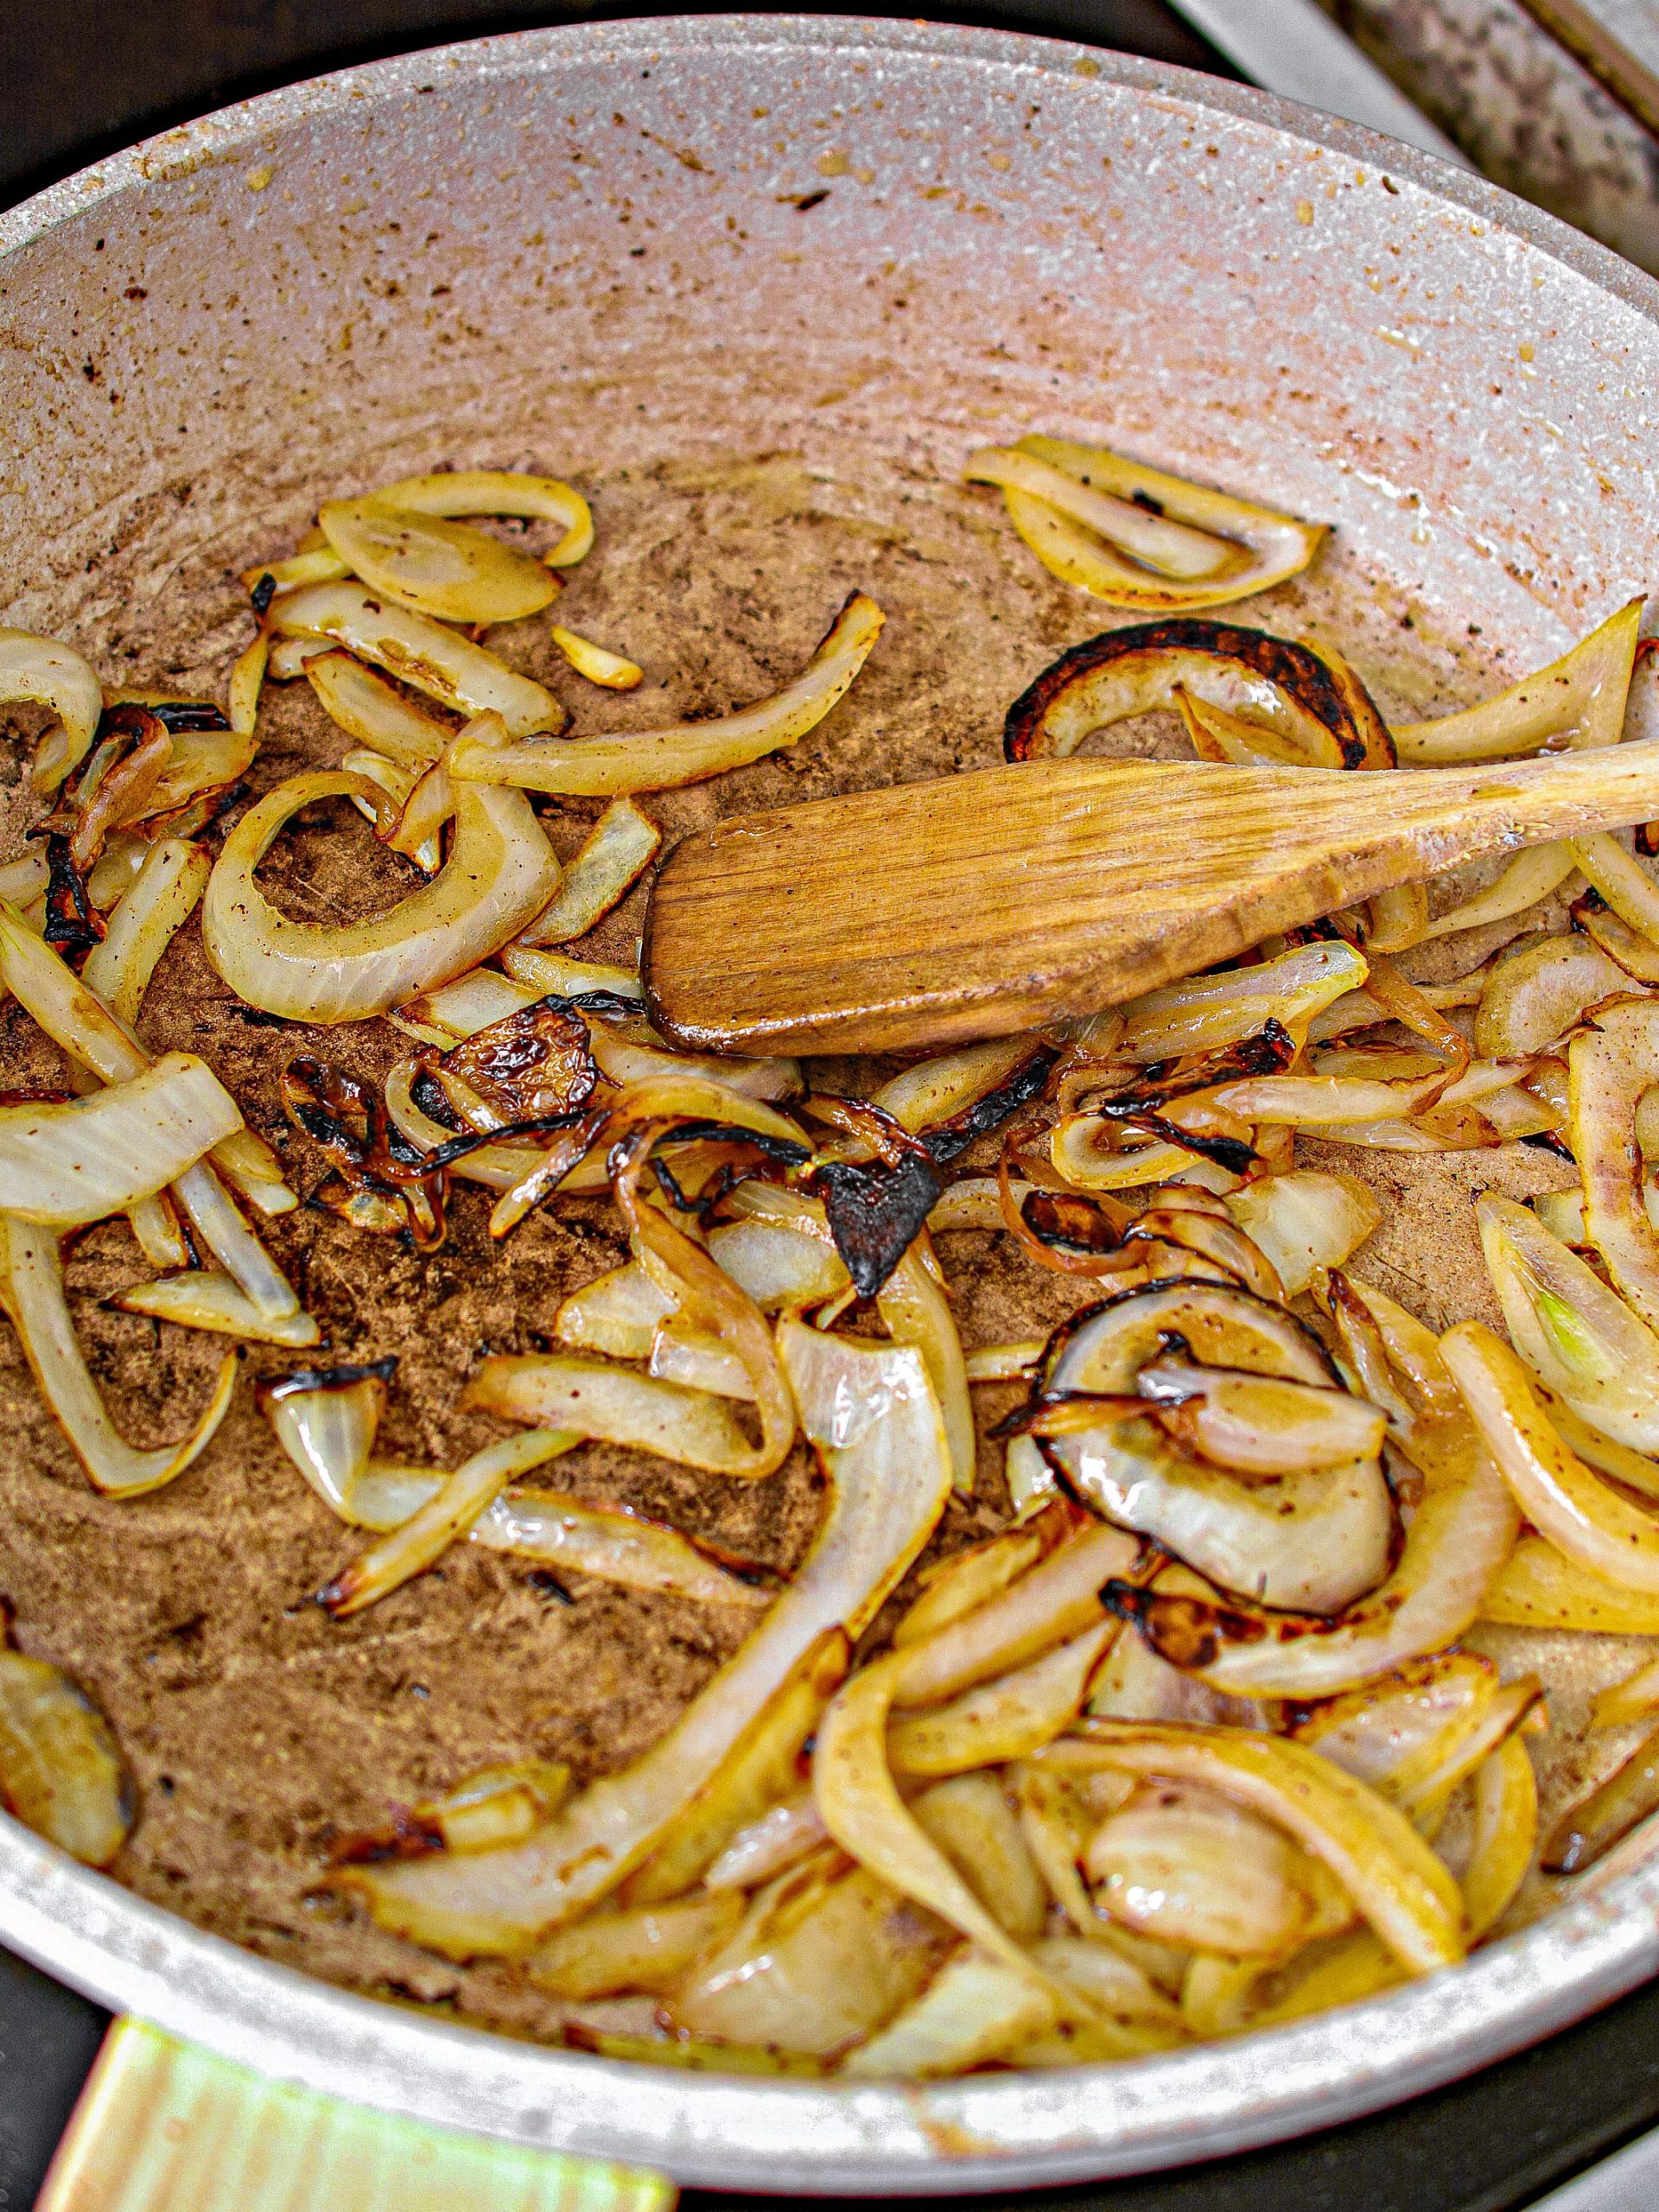 Add the onions to the heated skillet and cook until softened.